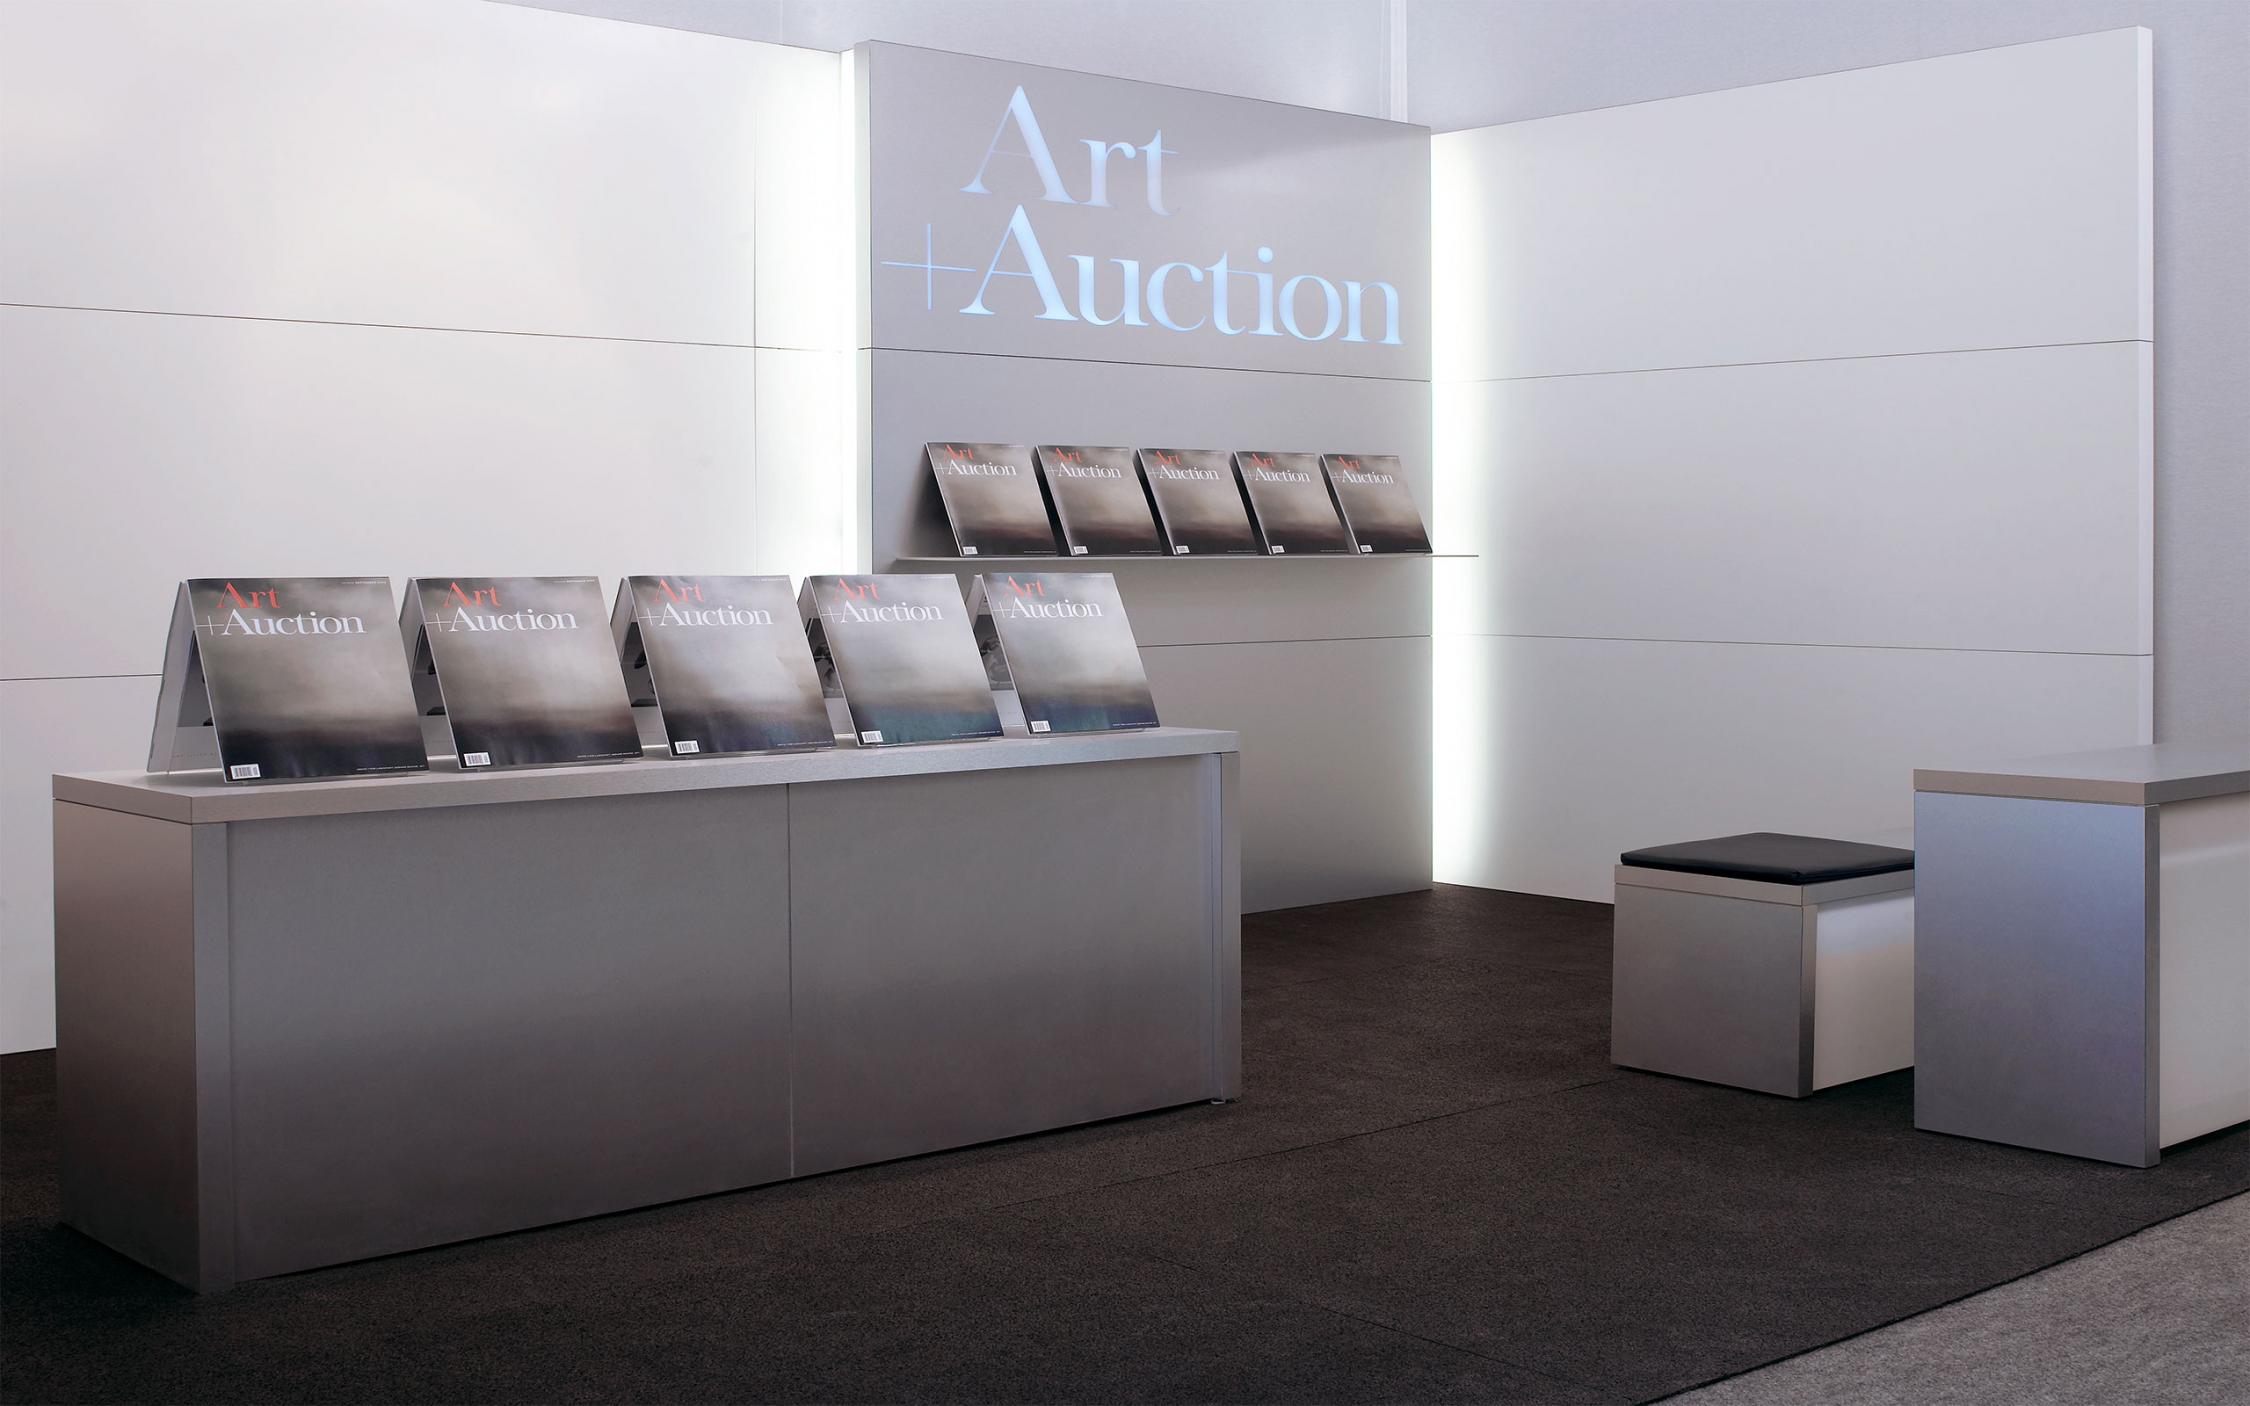 Art and auction furniture